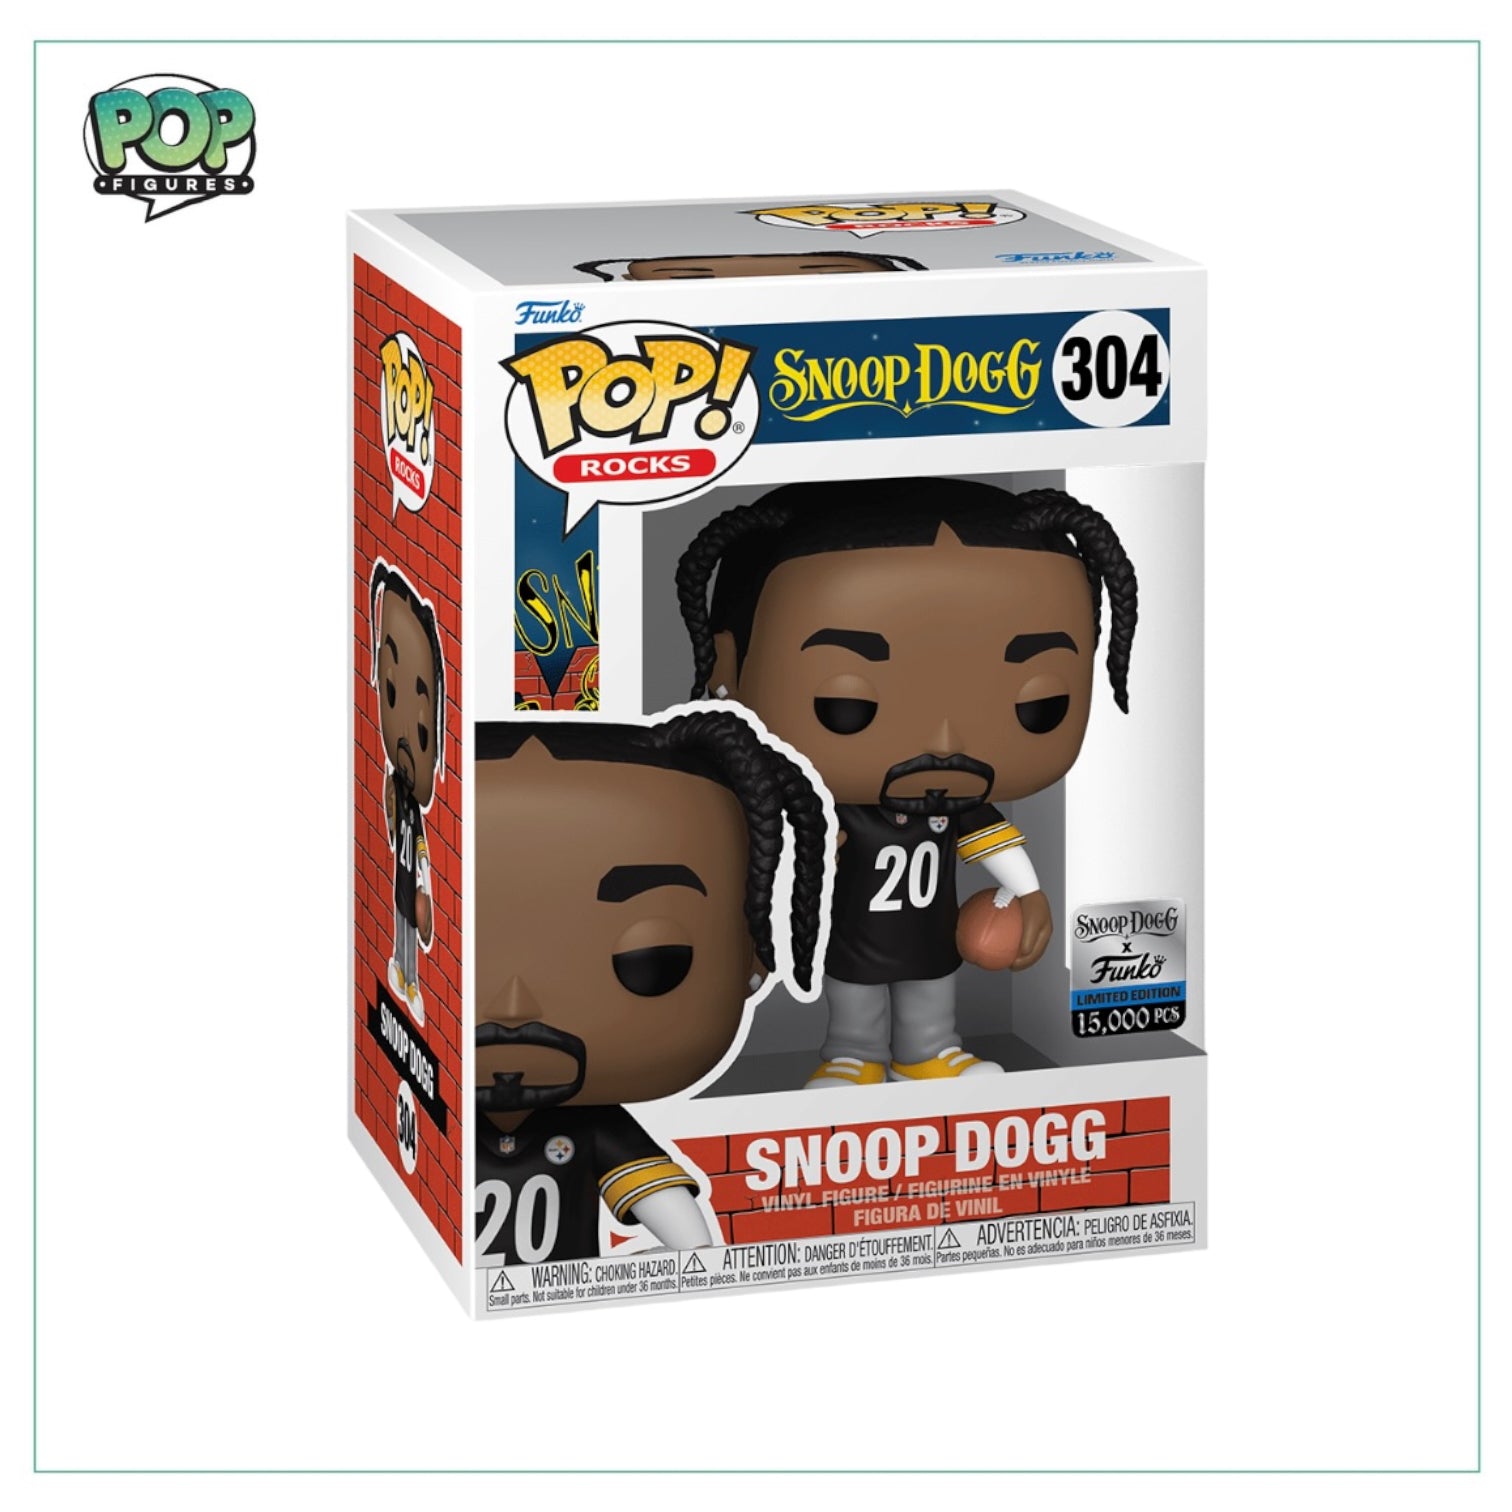 Snoop Dogg #304 (Steelers Jersey) Funko Pop! - Rocks - The Dogg House x Funko Exclusive LE15000 Pcs